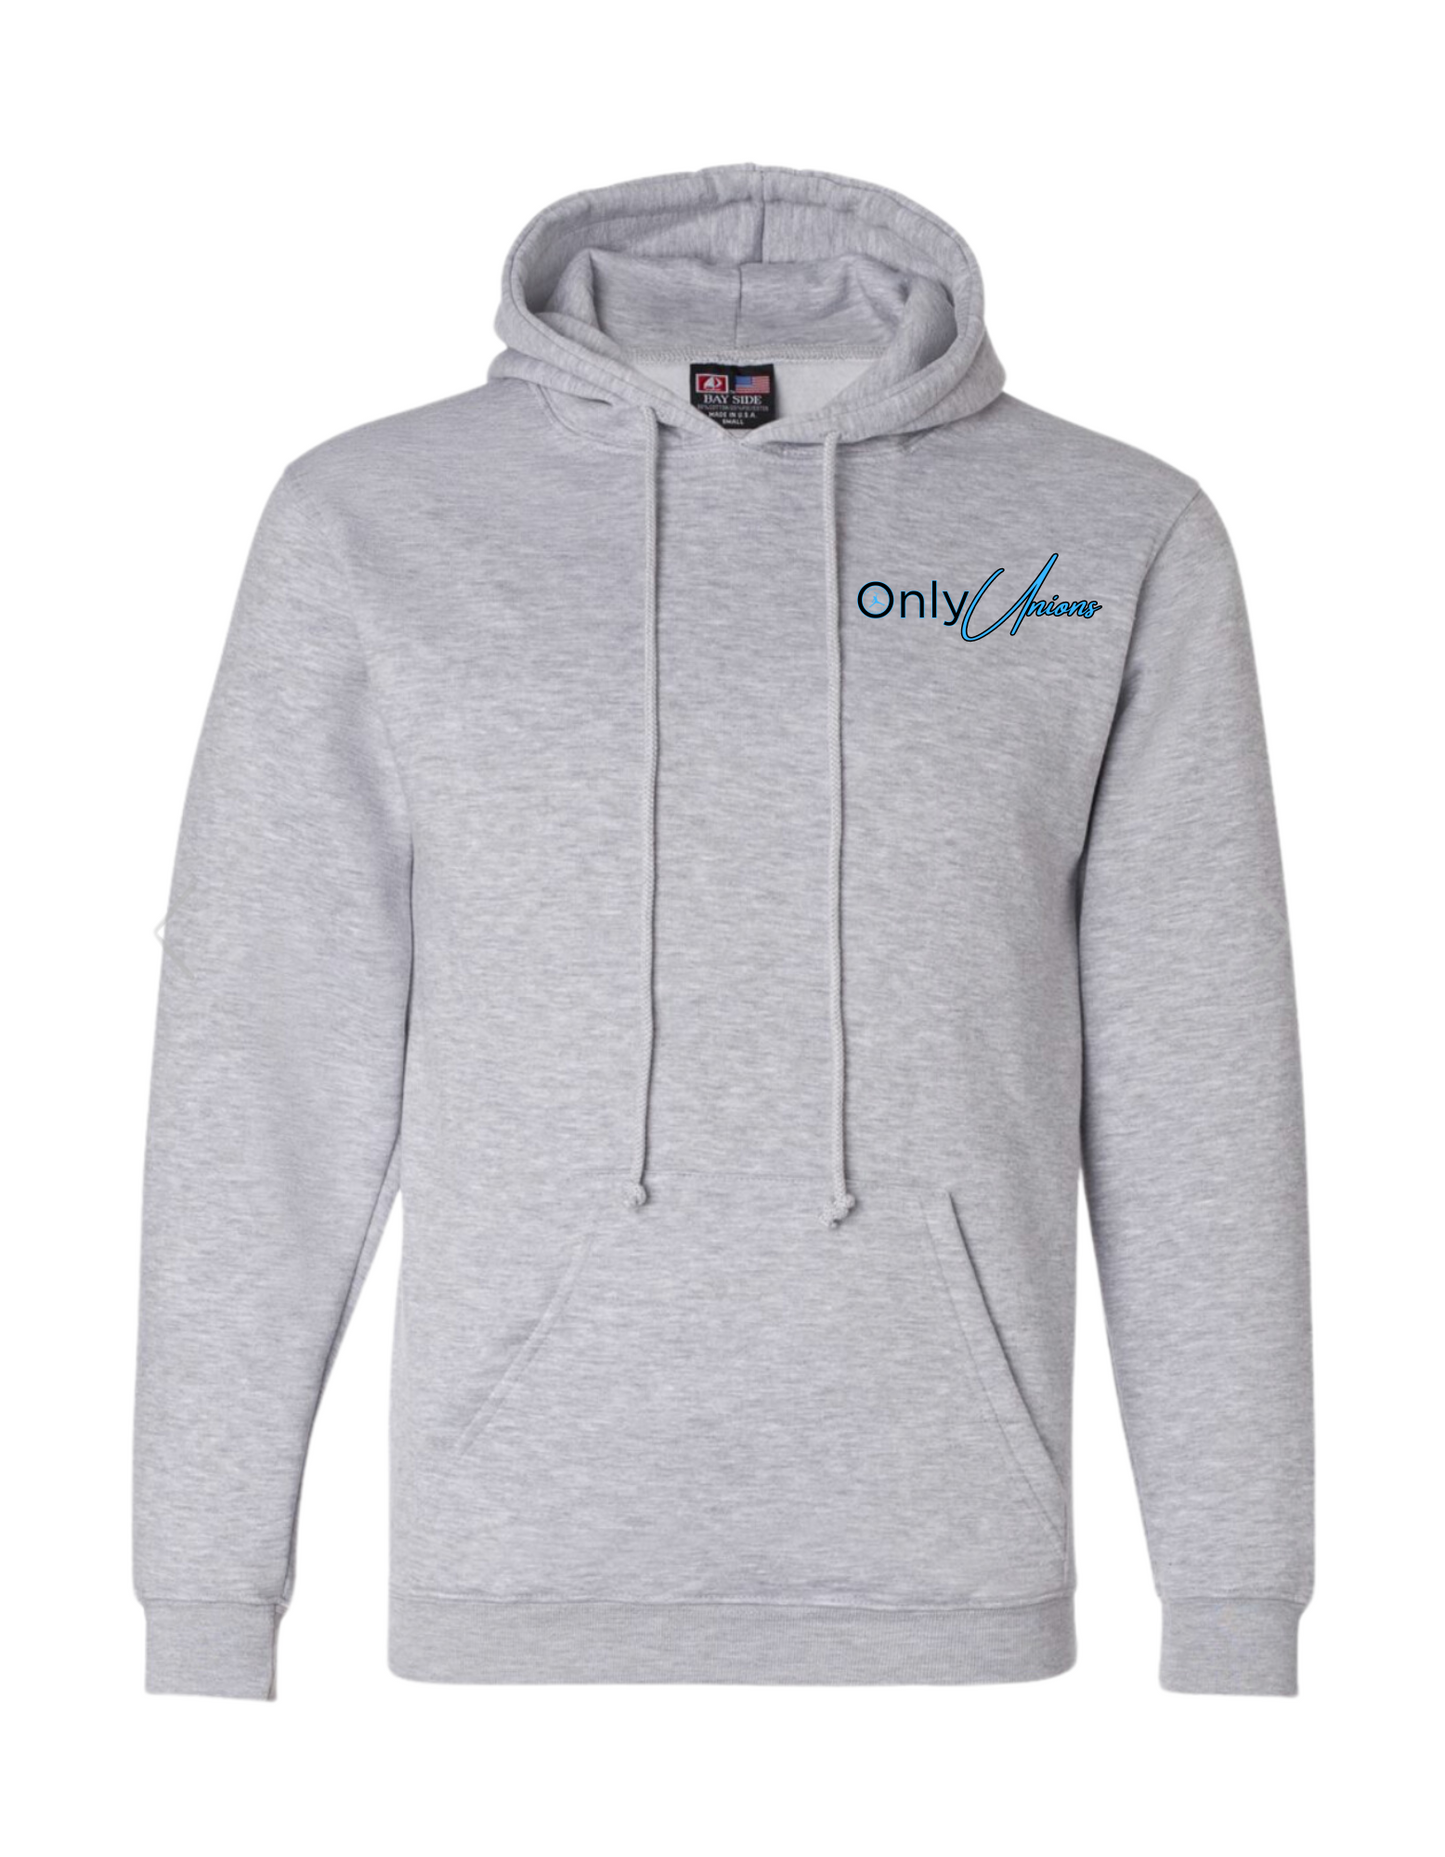 "ONLY UNIONS" HOODIE